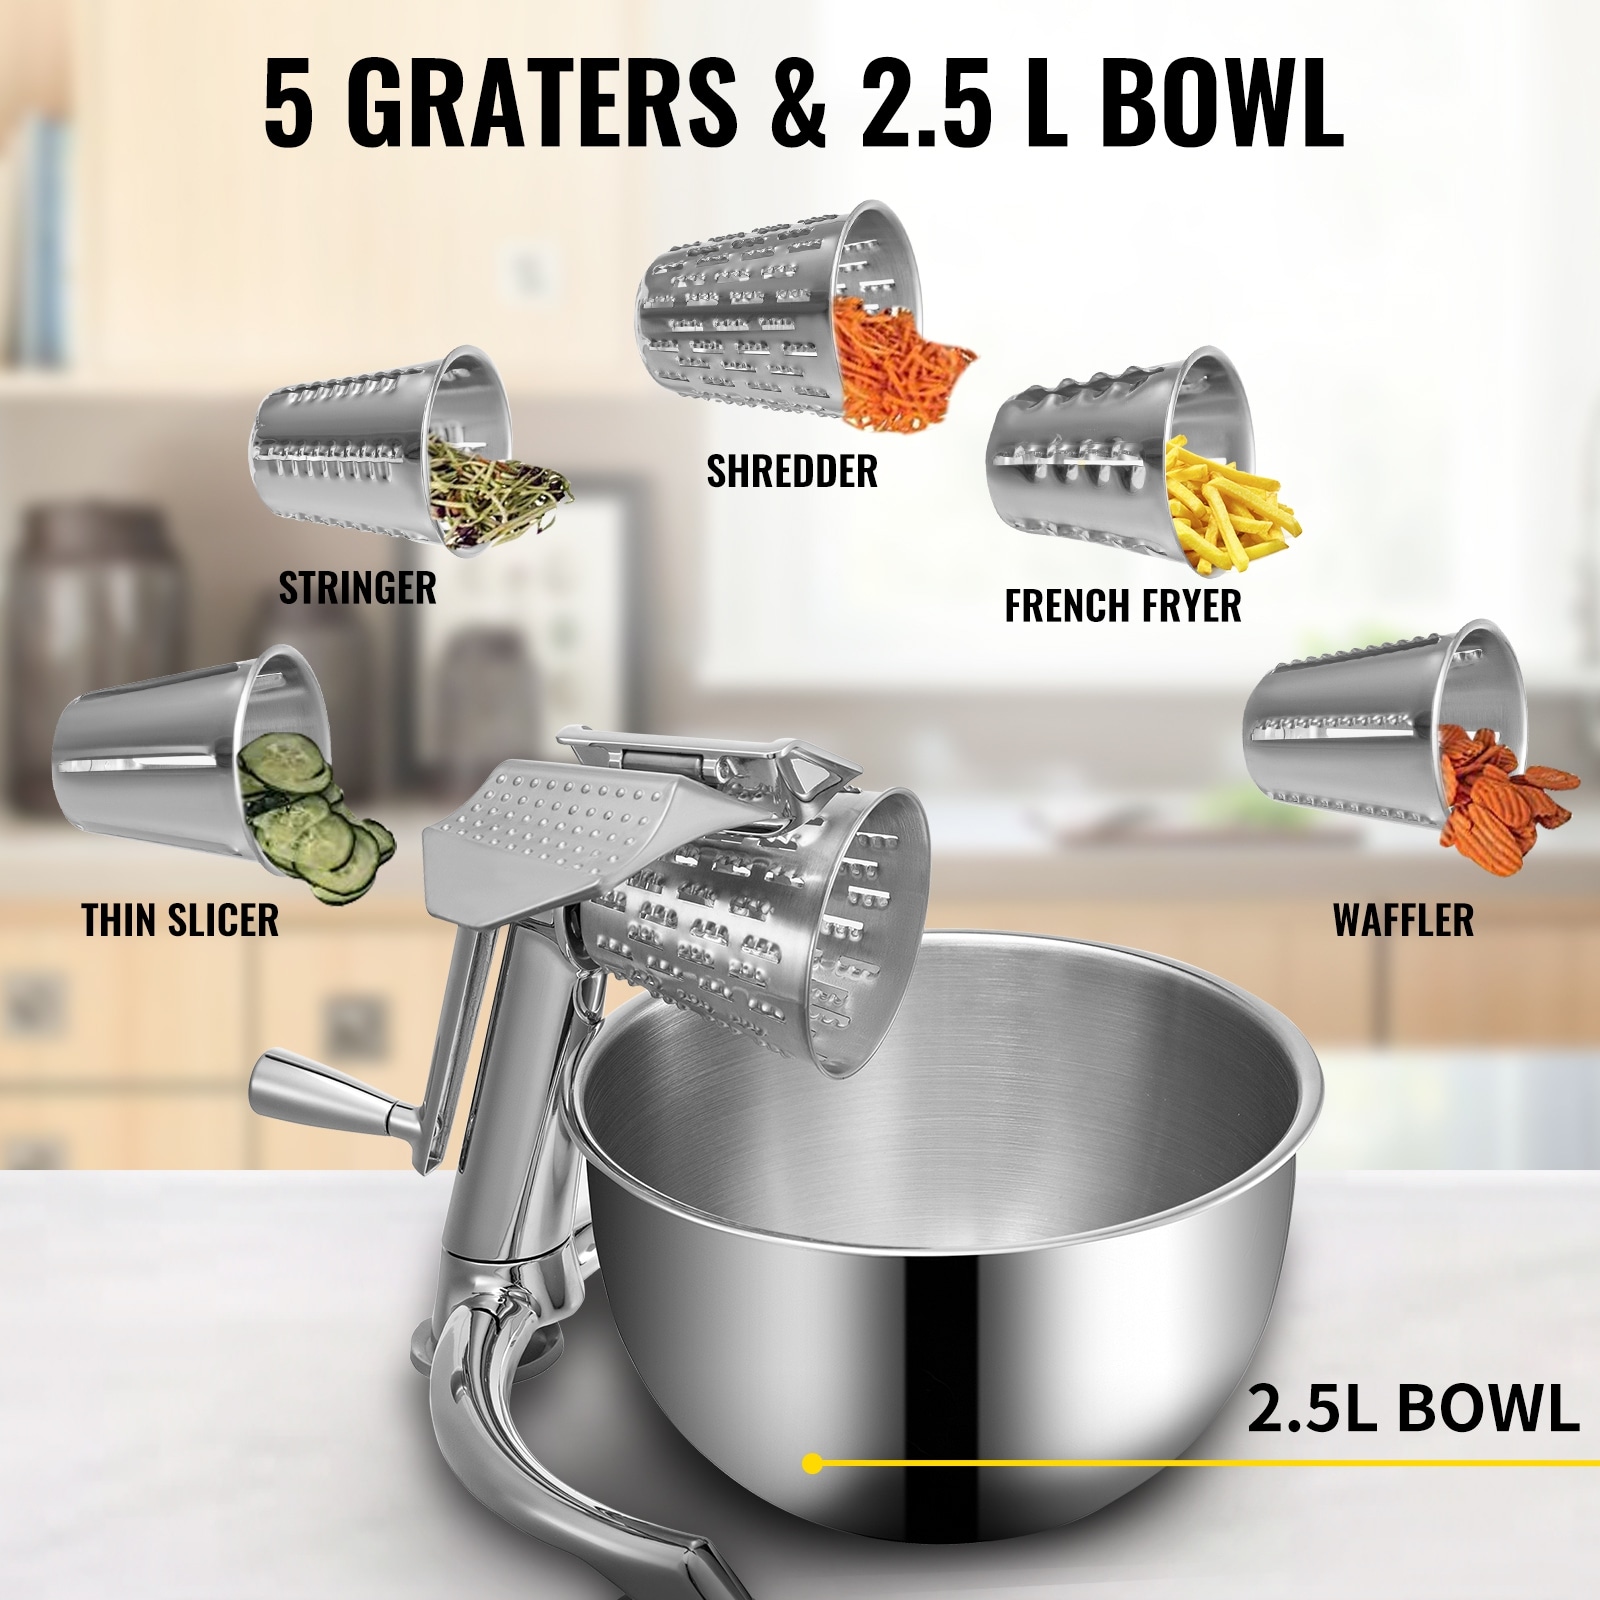 https://ak1.ostkcdn.com/images/products/is/images/direct/6f56f1efd12d7d0981ef6378567e76bca958d50e/VEVOR-Rotary-Cheese-Grater-Zinc-Alloy-Rotary-Vegetable-Mandoline-Manual-Cheese-Mandoline-w--5-Stainless-Steel-Cutting-Cones.jpg